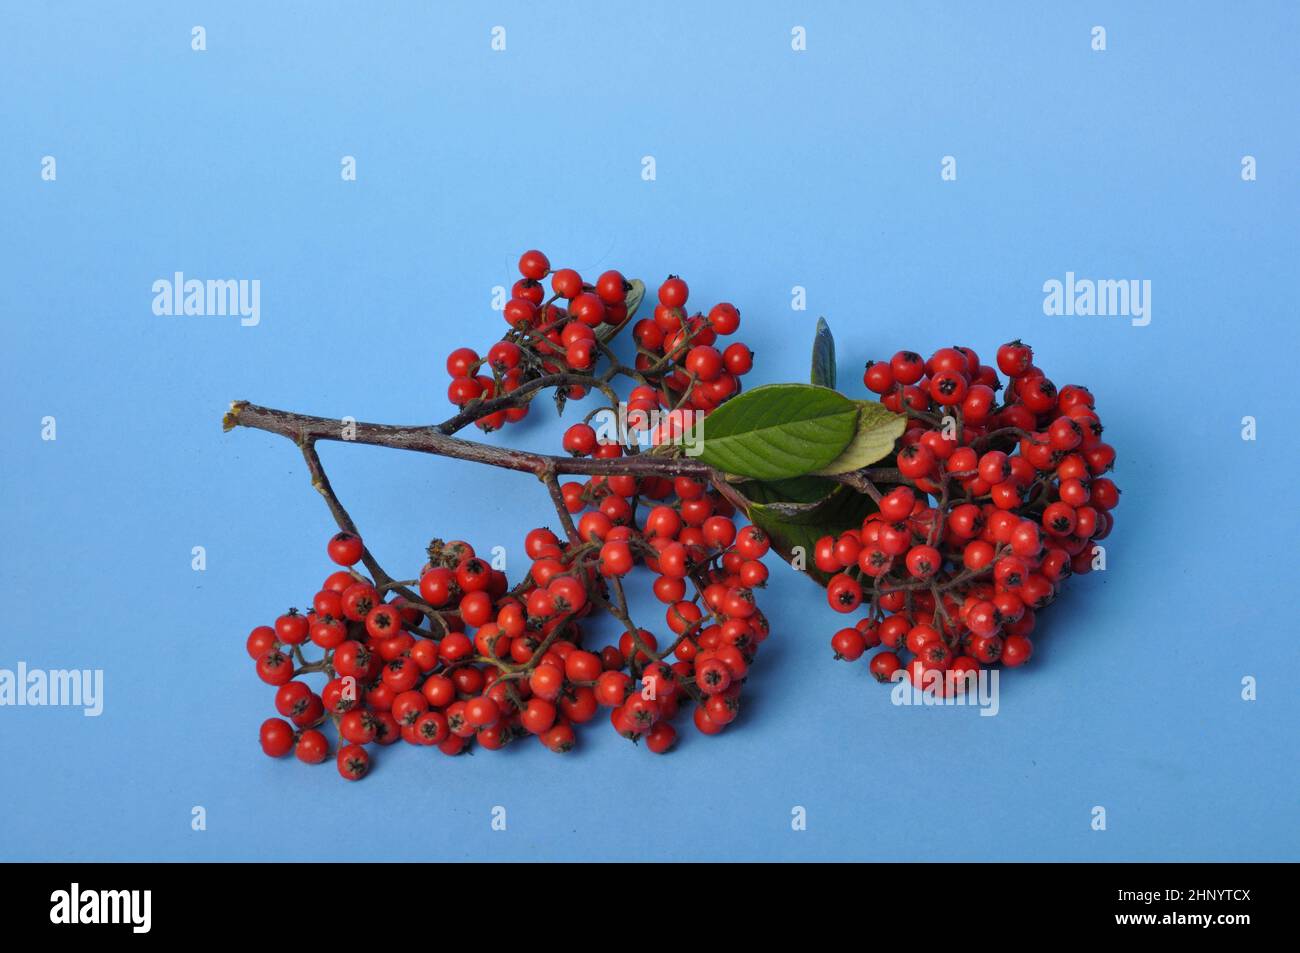 Cotoneaster fruit on a blue background Stock Photo